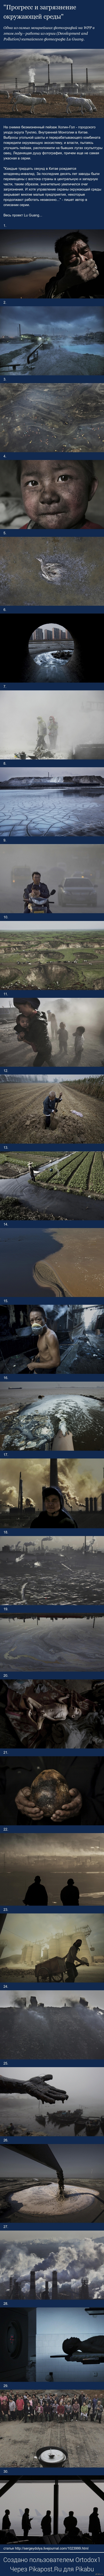 &quot;    &quot;       World Press Photo    -    (Development and Pollution)   Lu Guang.